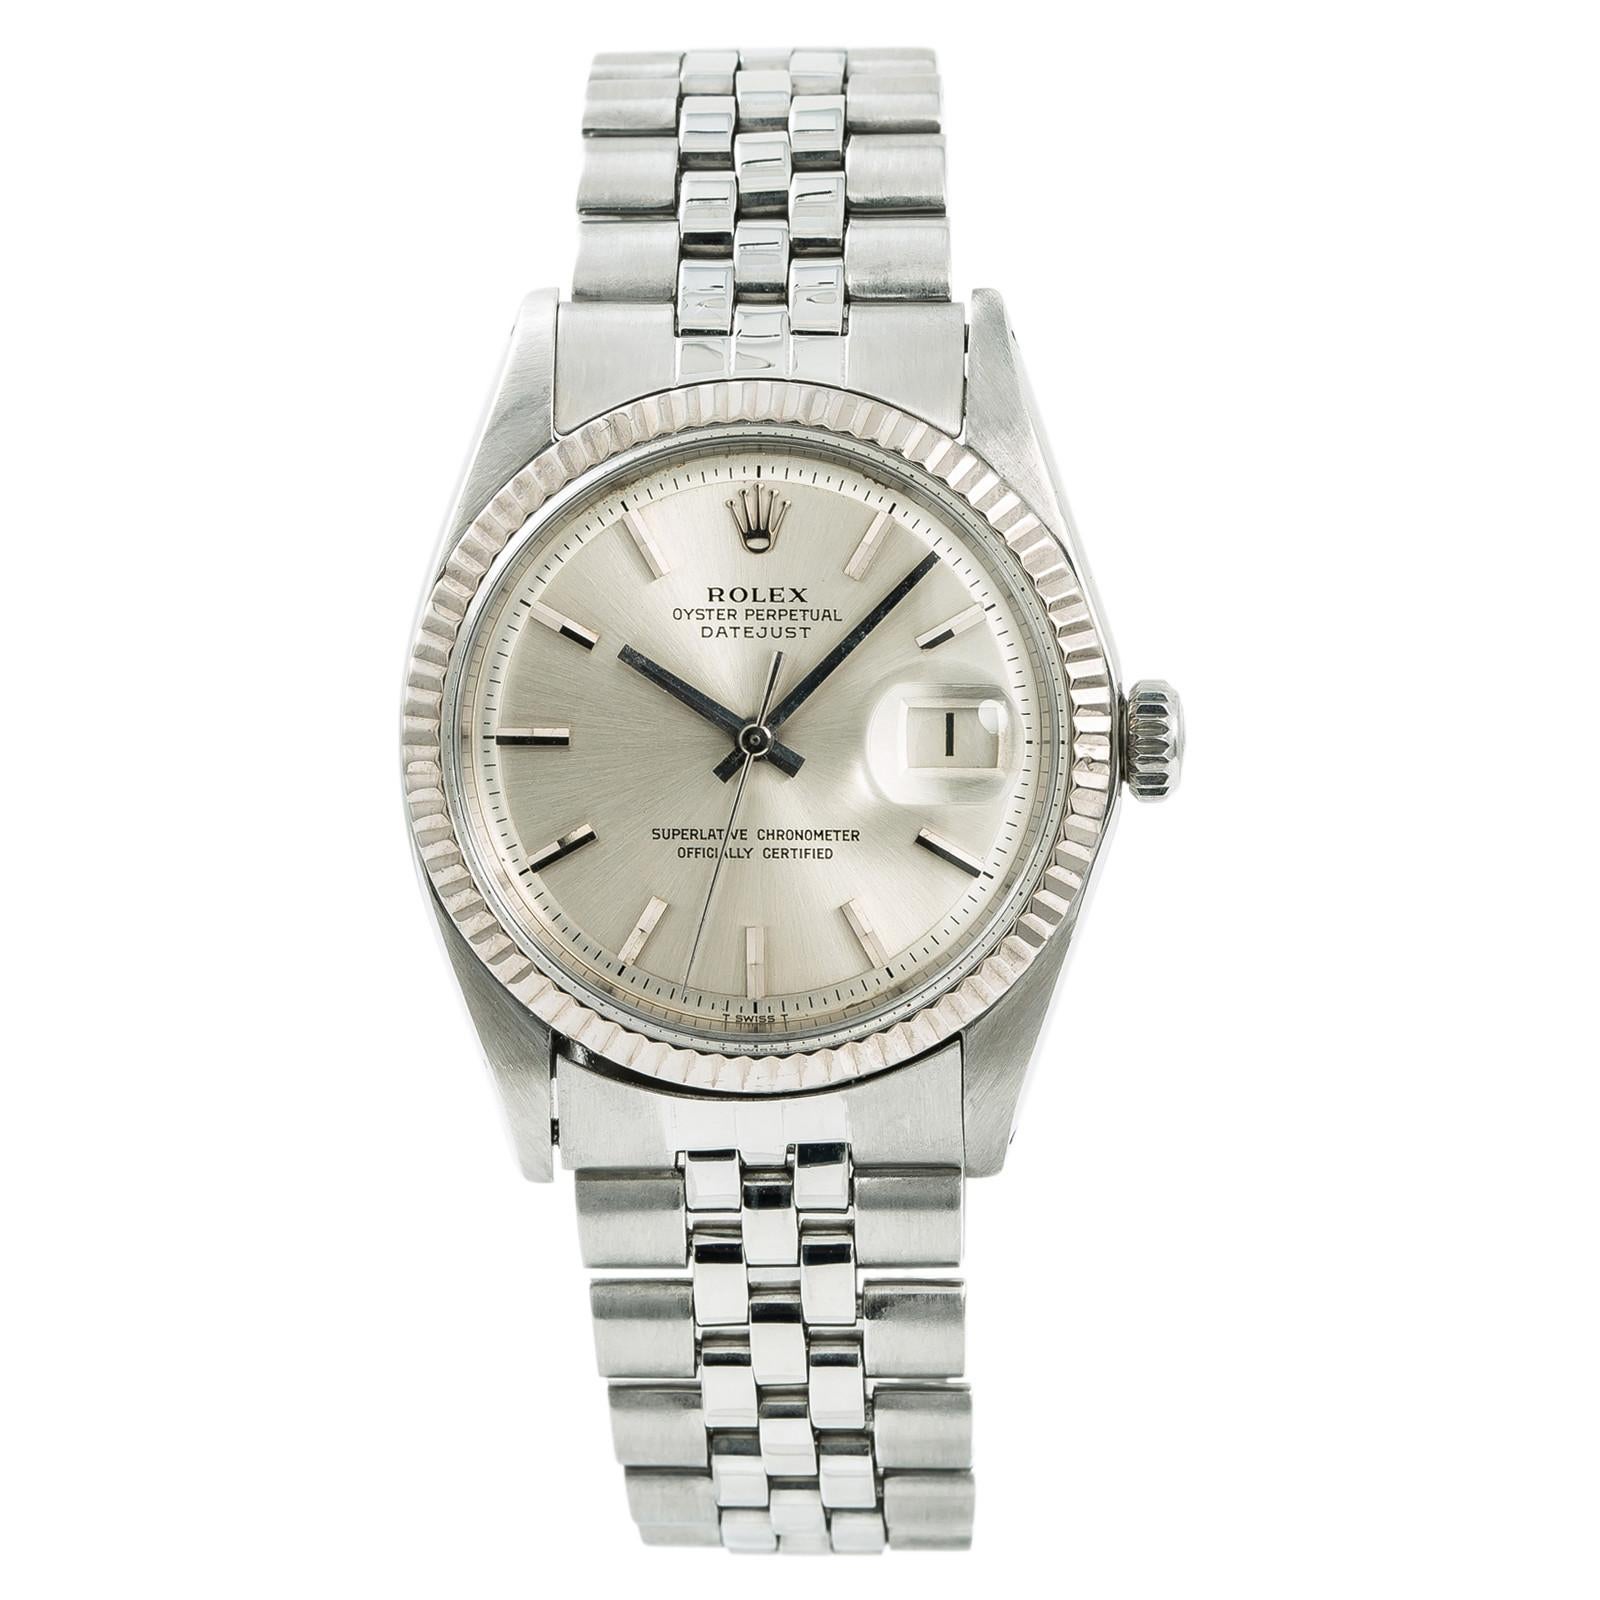 Rolex Datejust 1601, Dial Certified Authentic For Sale